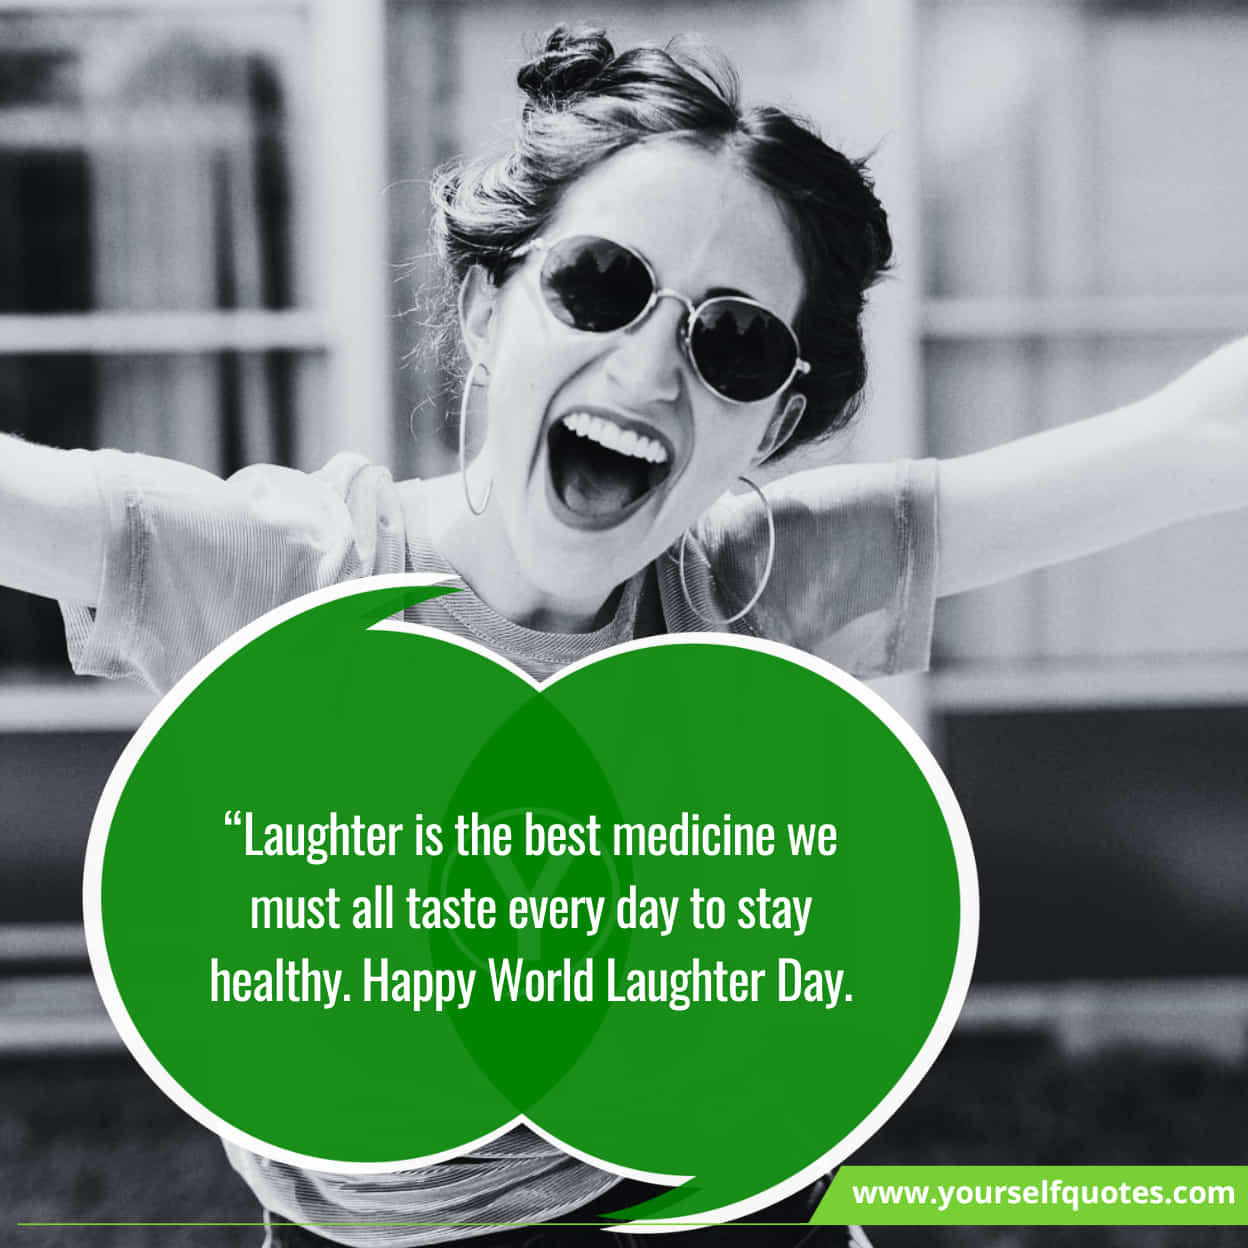 88 World Laughter Day: Quotes, Wishes, Messages